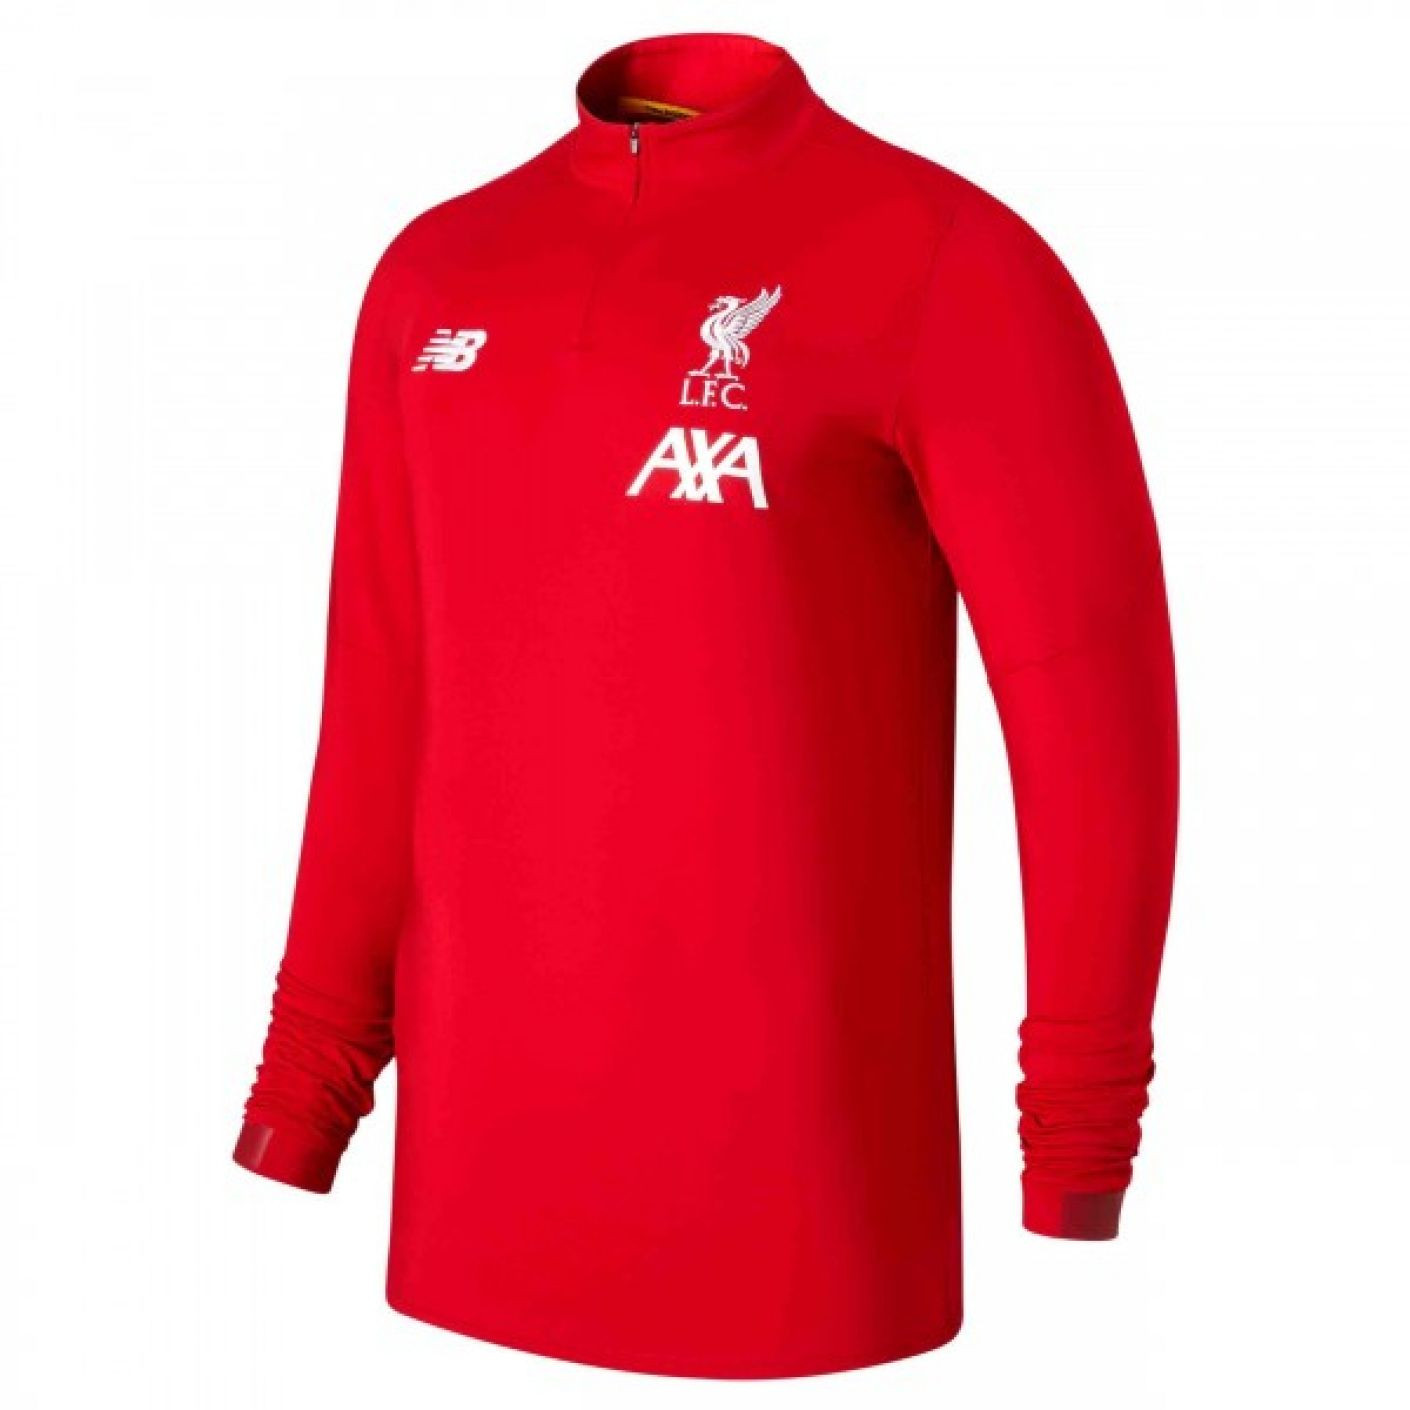 NEWBALANCE LIVERPOOL TRG TOP ROUGE 2019/2020